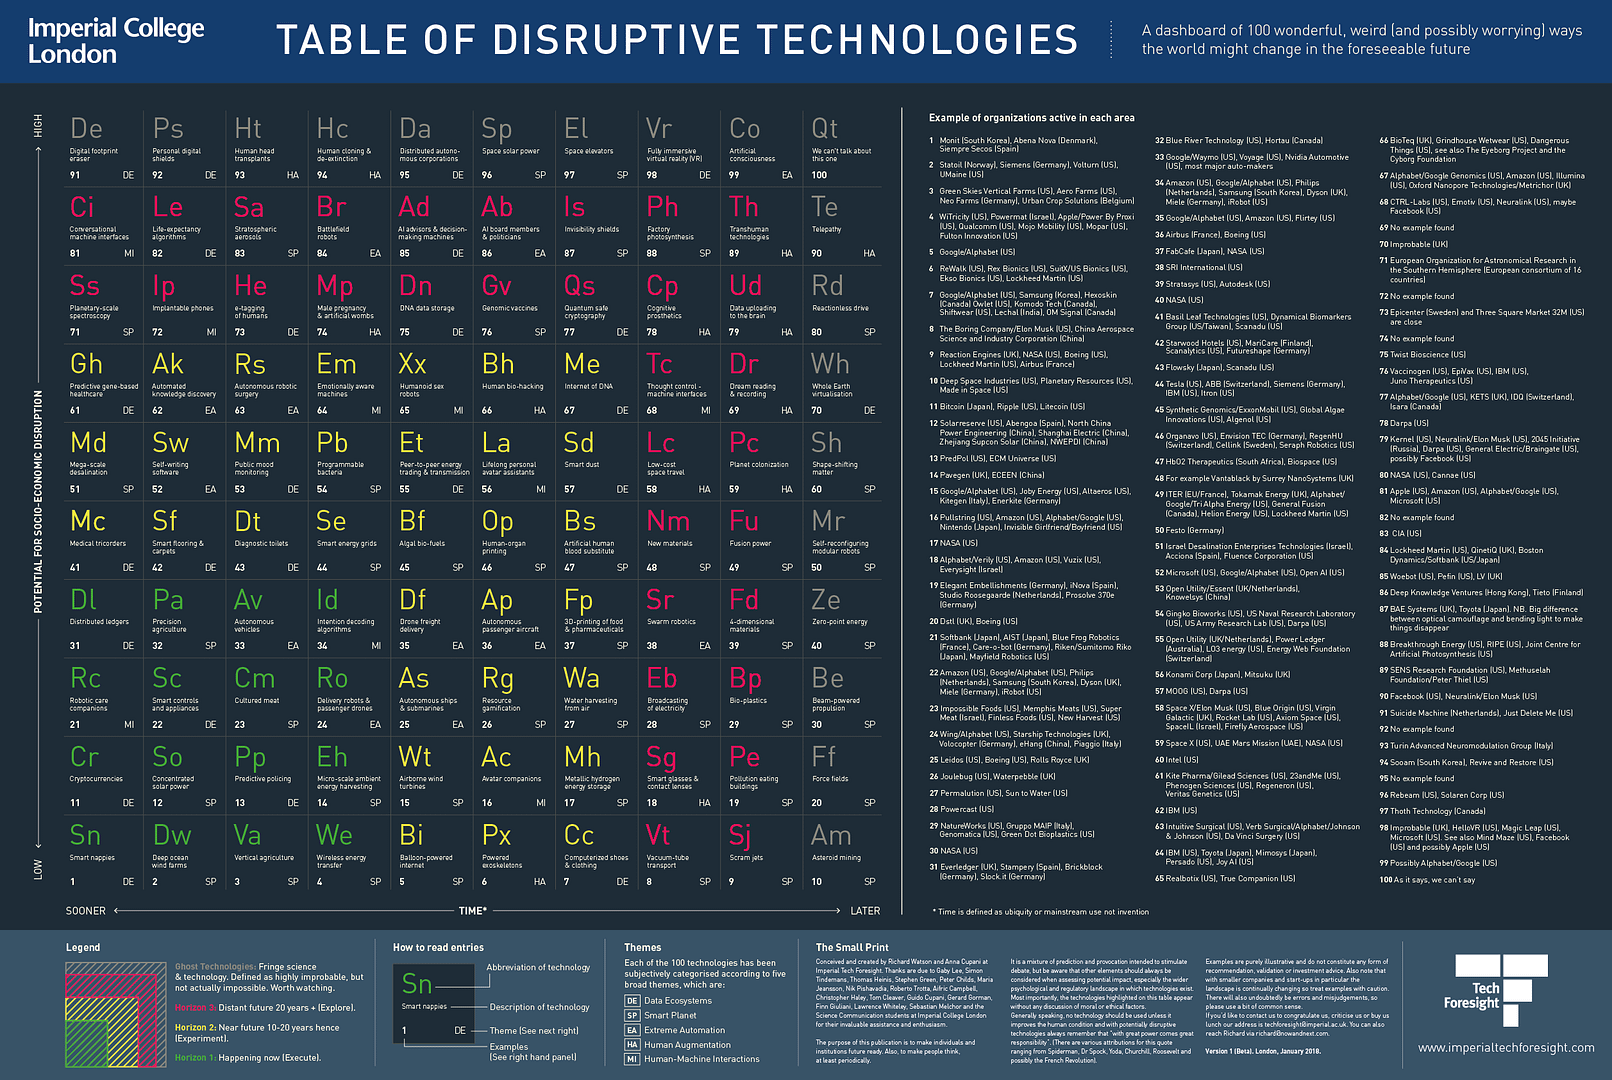 Table of disruptive technologies